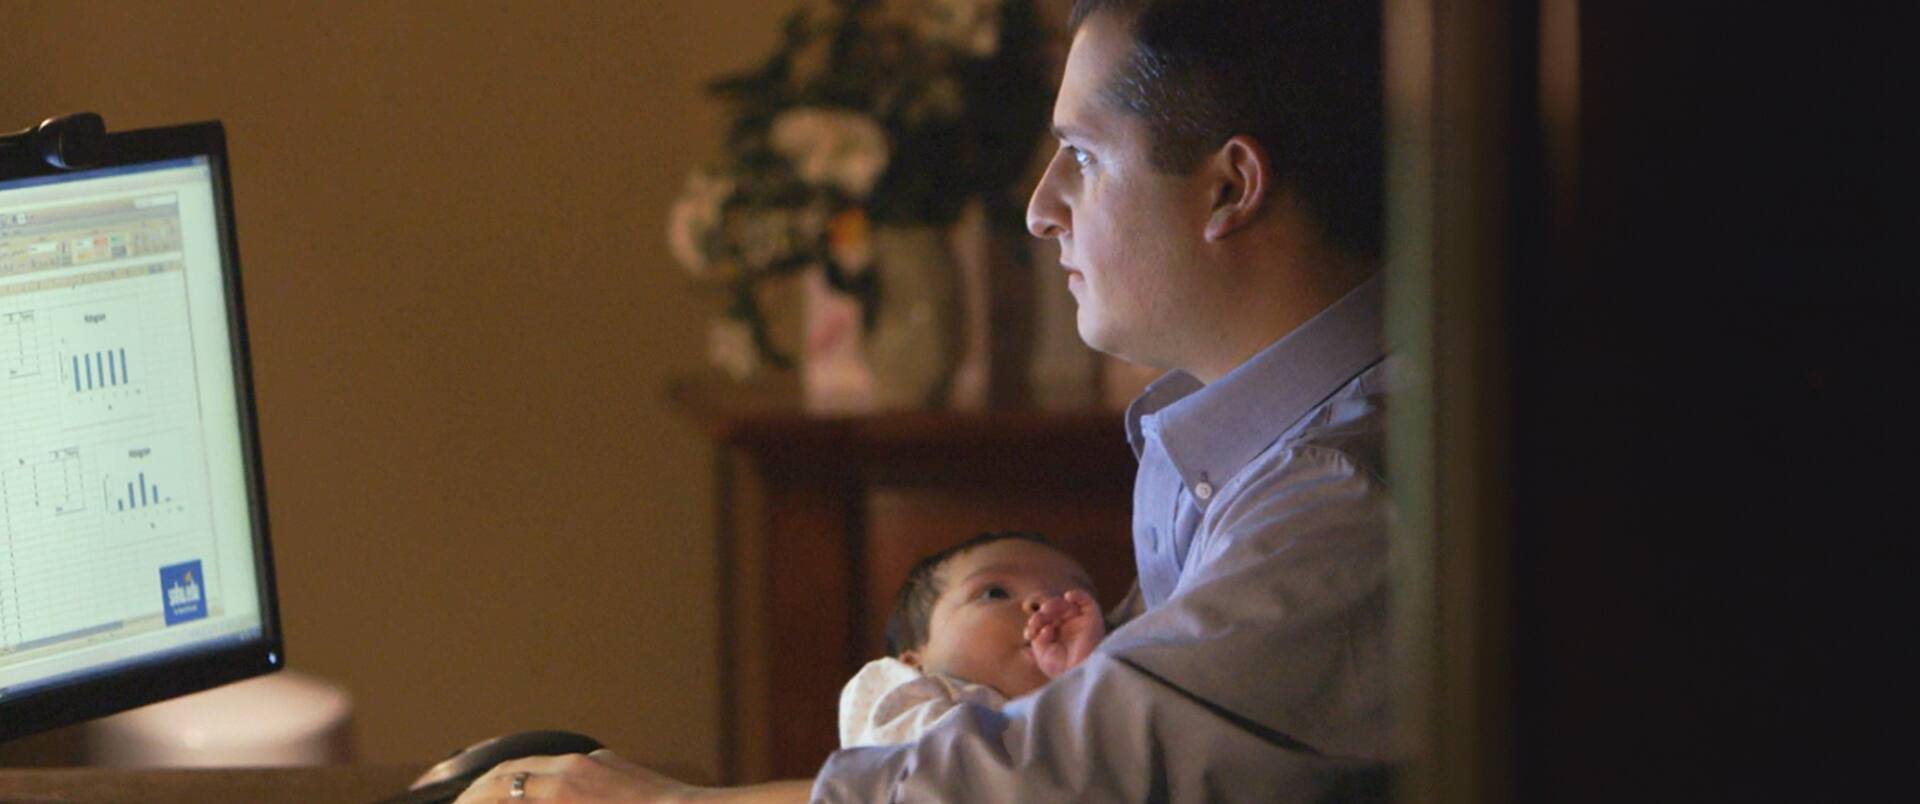 Peter Forcelli, a 2015 master's in healthcare administration alum, viewing charts on a computer while holding a baby.